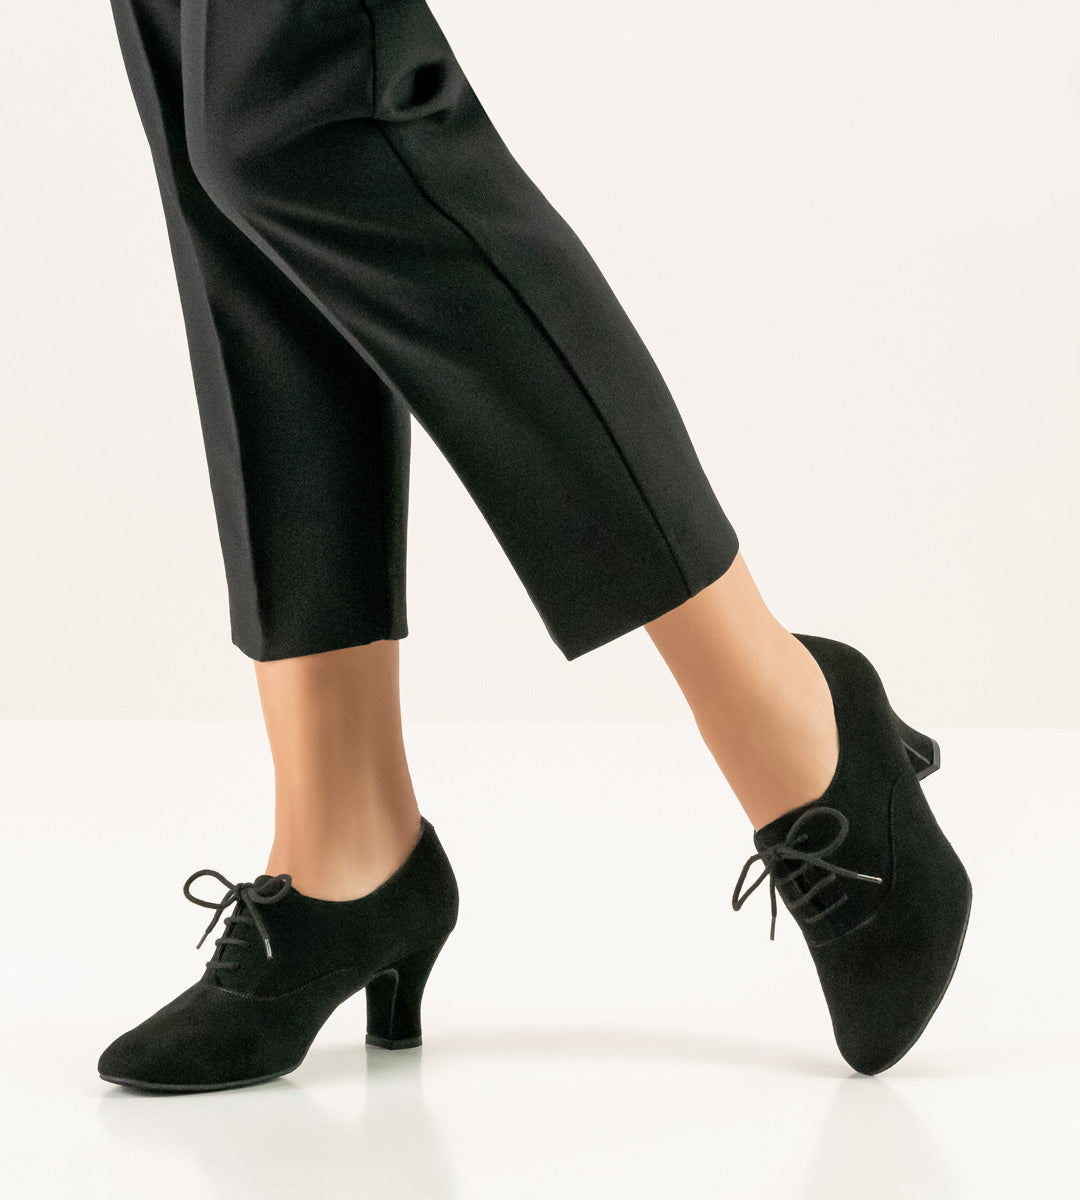 Ladies Practice Dance Shoes in Black Suede with a variety of Heel Heights